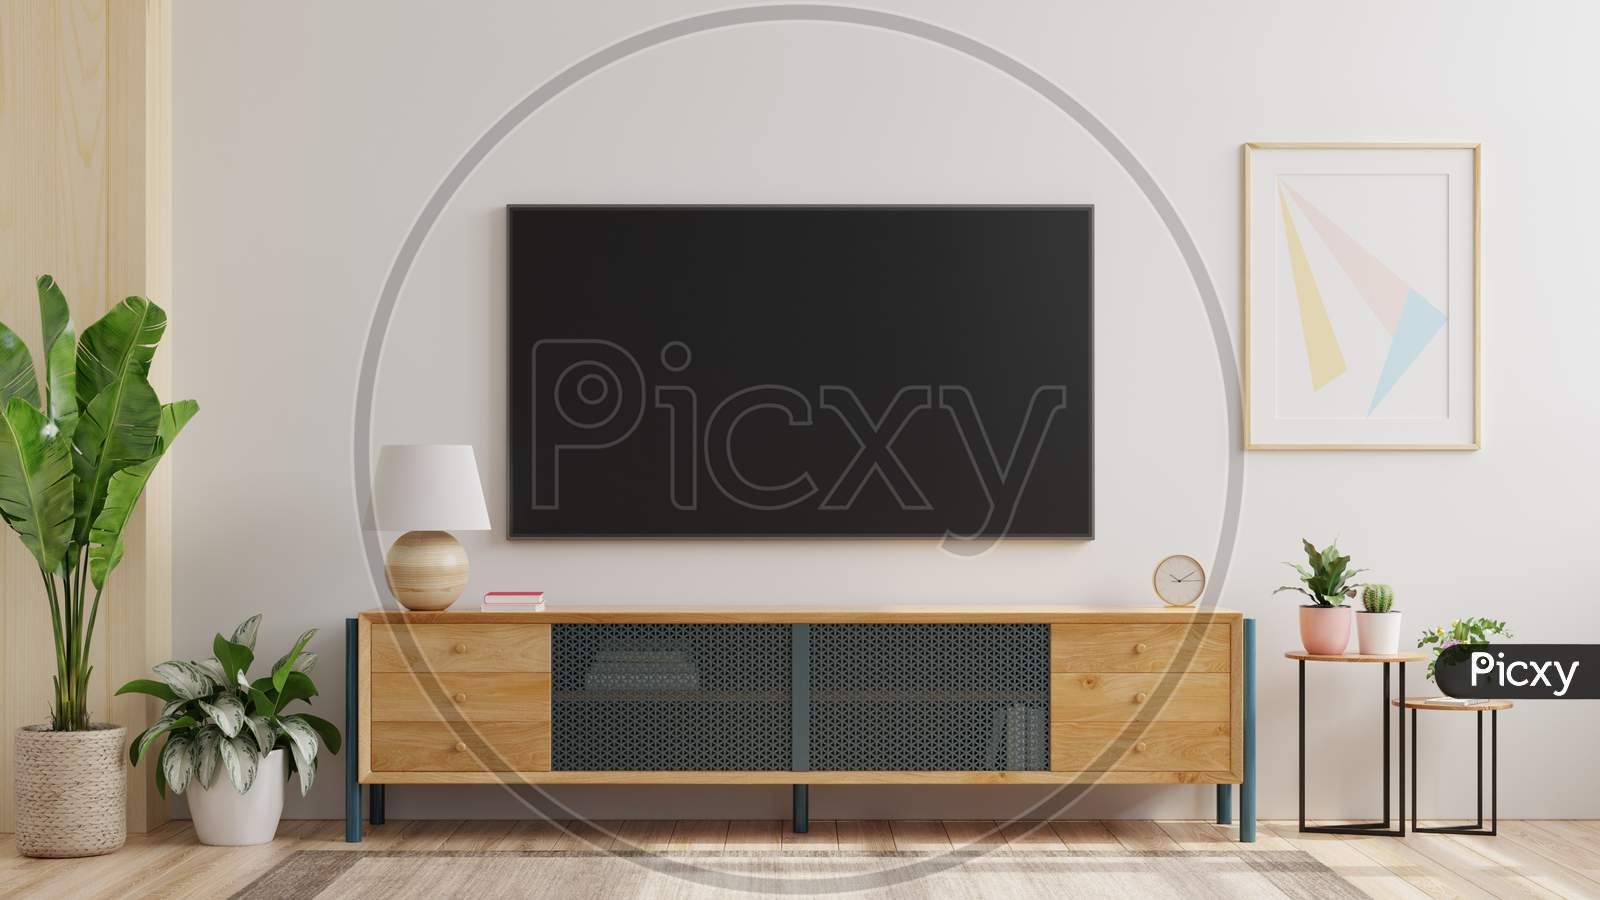 Mockup A Tv Wall Mounted In A Living Room Room With A White Wall.